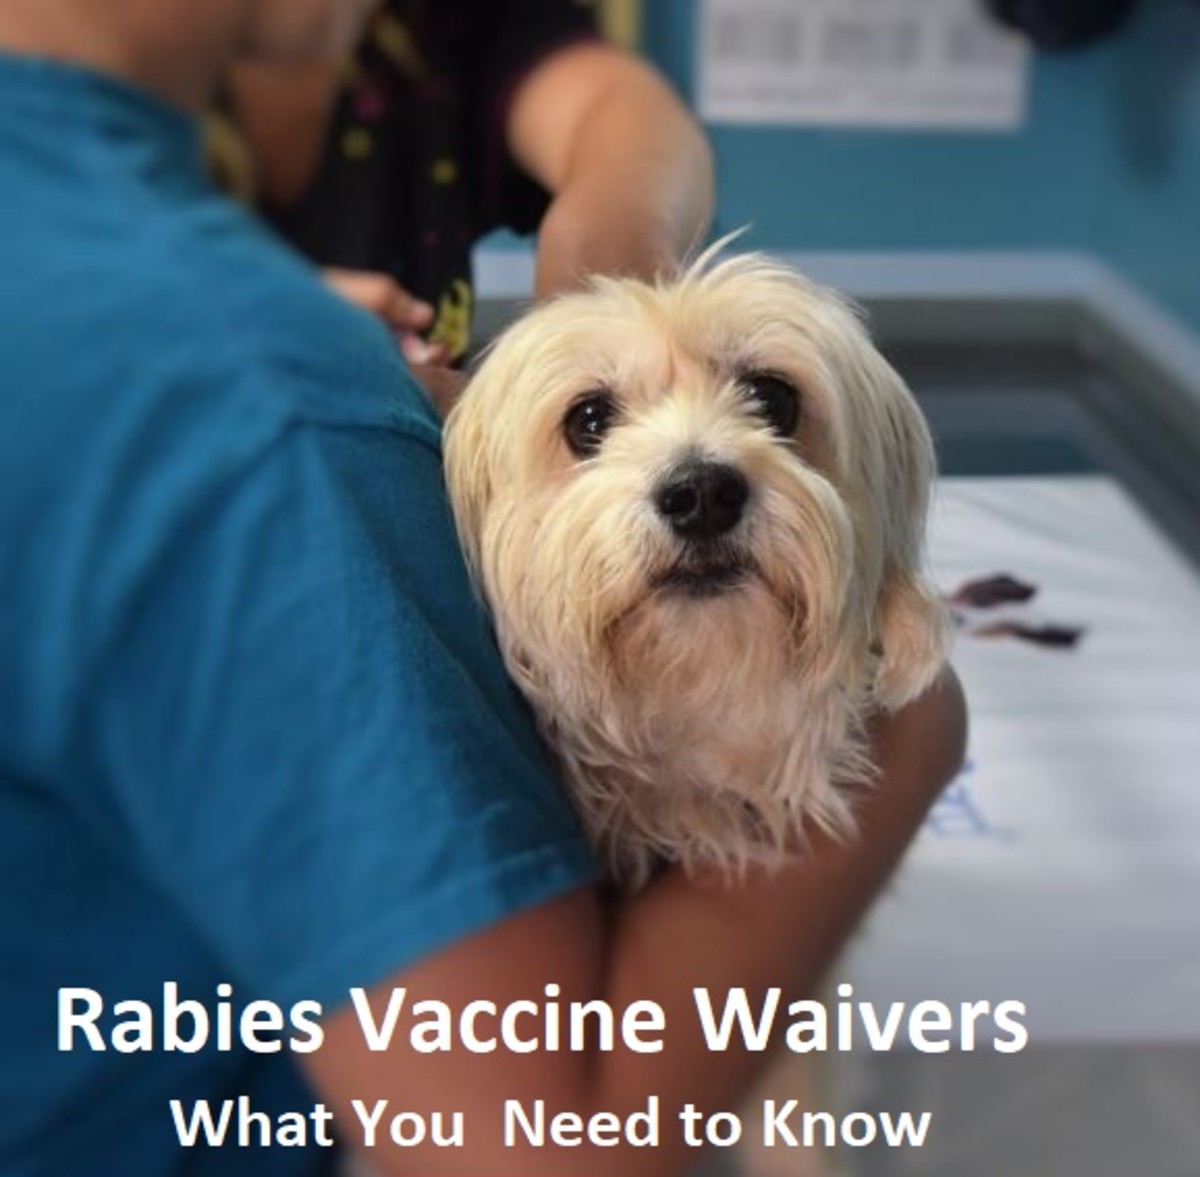 Rabies Vaccine Waivers for Dogs: What to Know